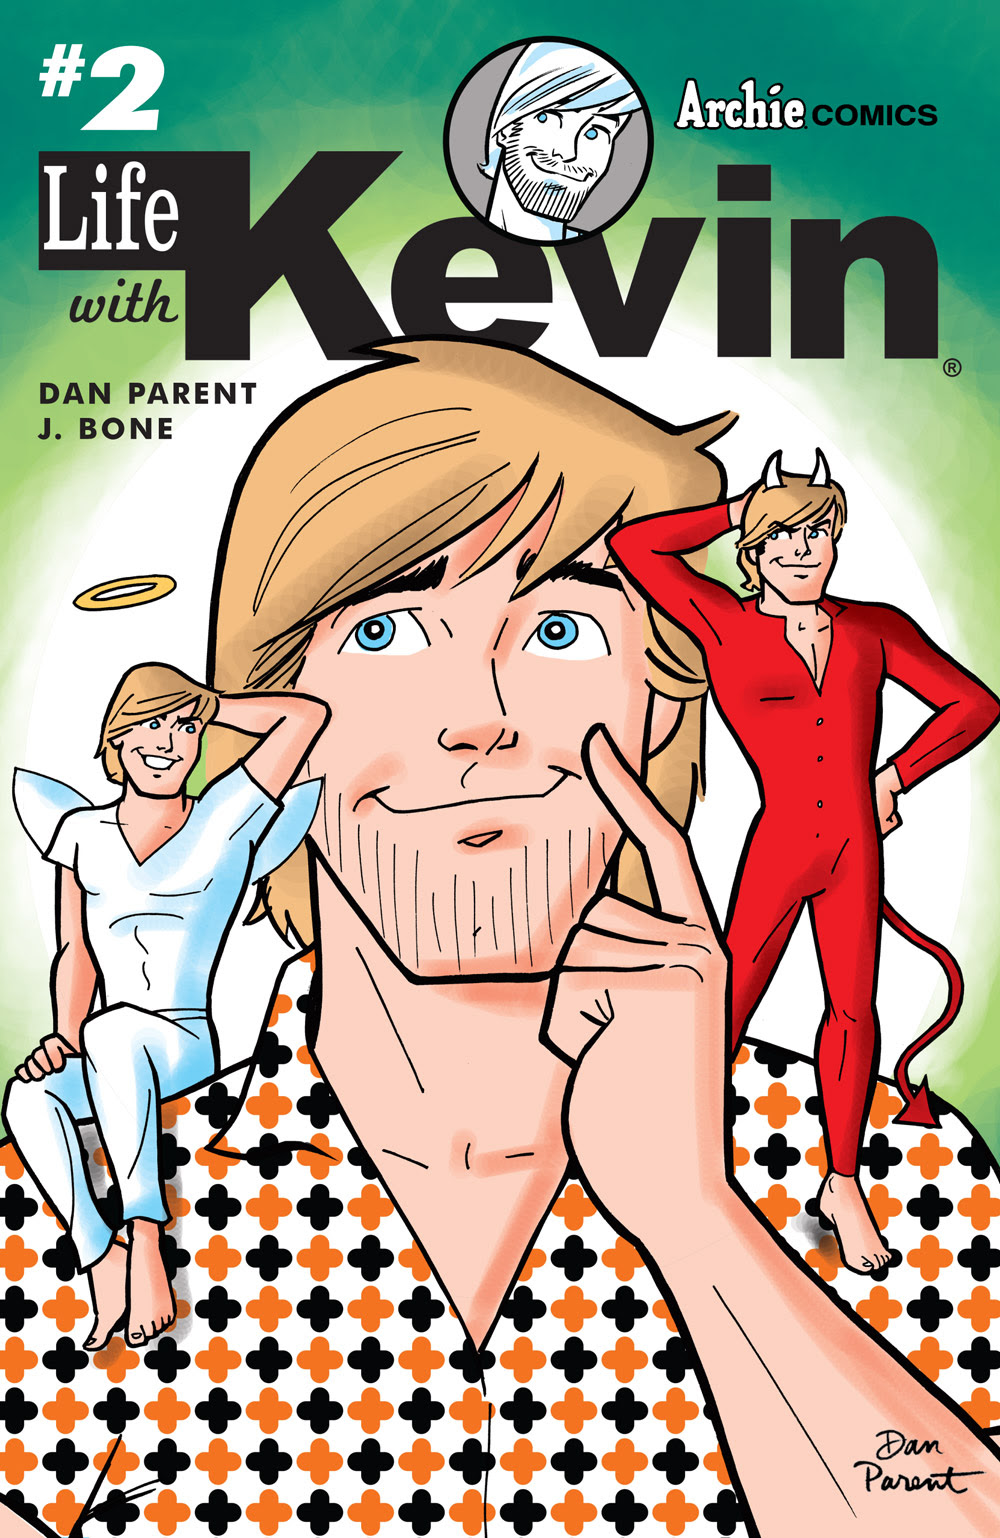 Life With Kevin #2 cover by Dan Parent